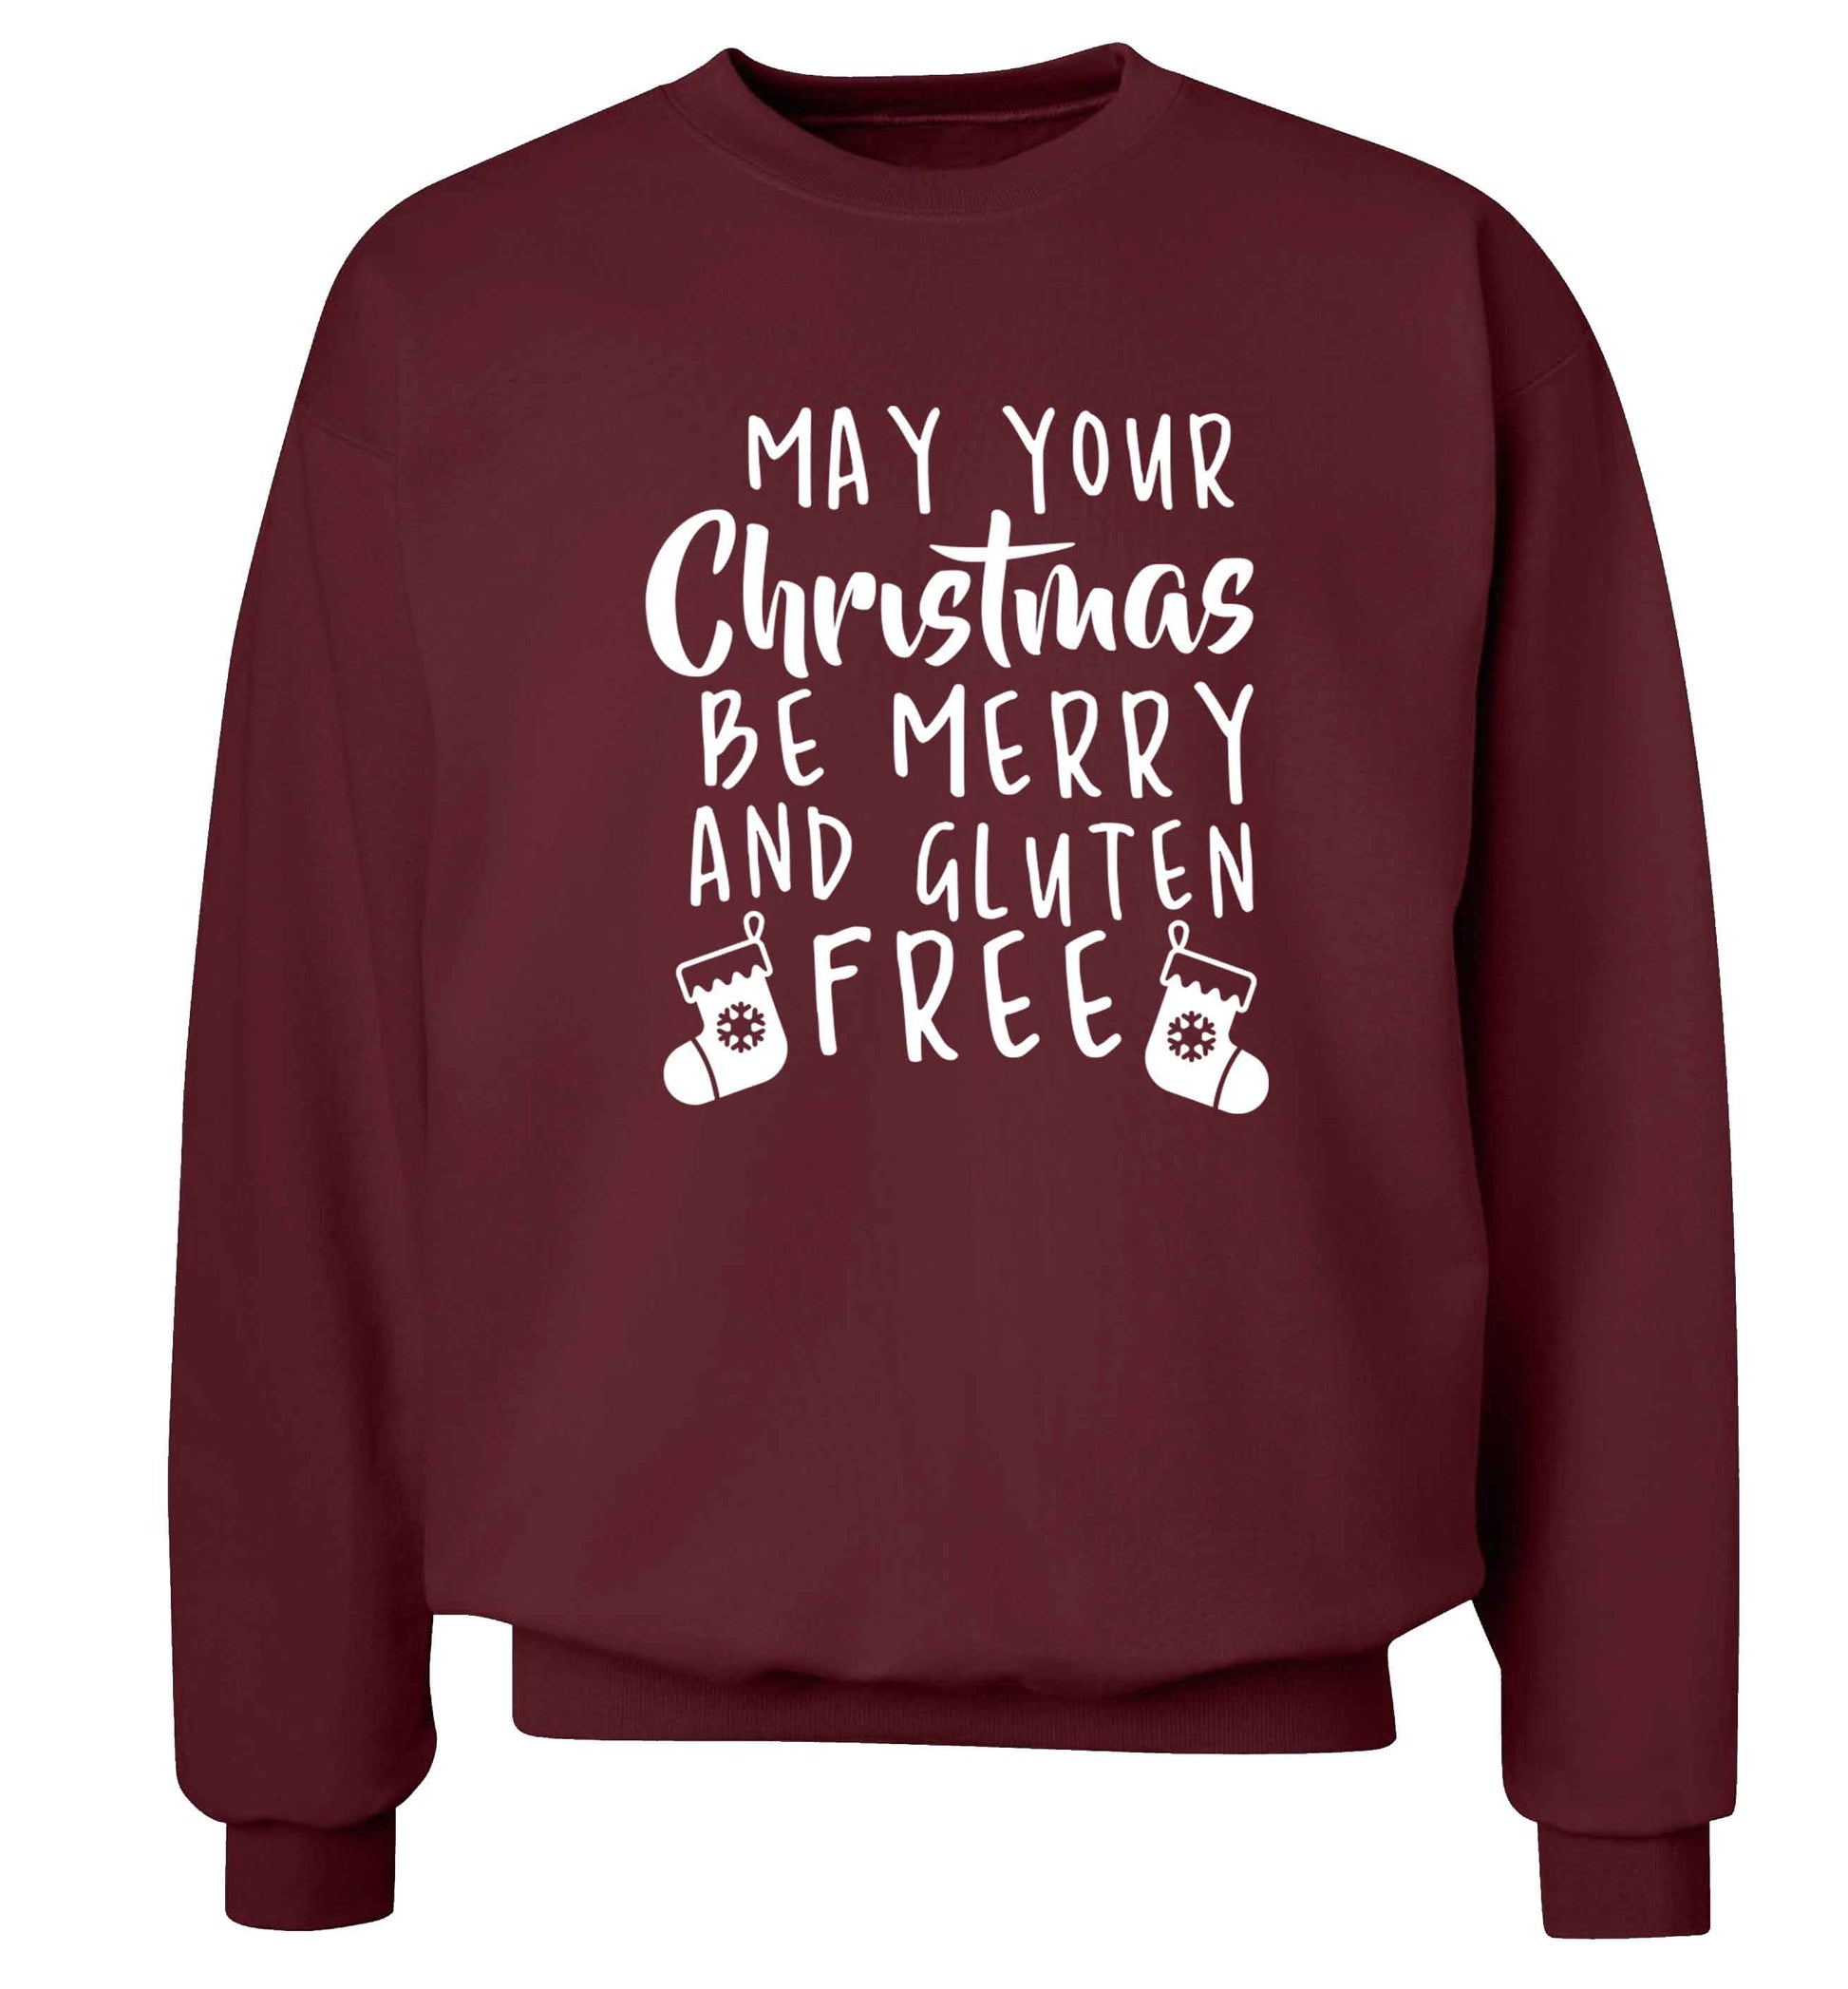 May your Christmas be merry and gluten free Adult's unisex maroon Sweater 2XL